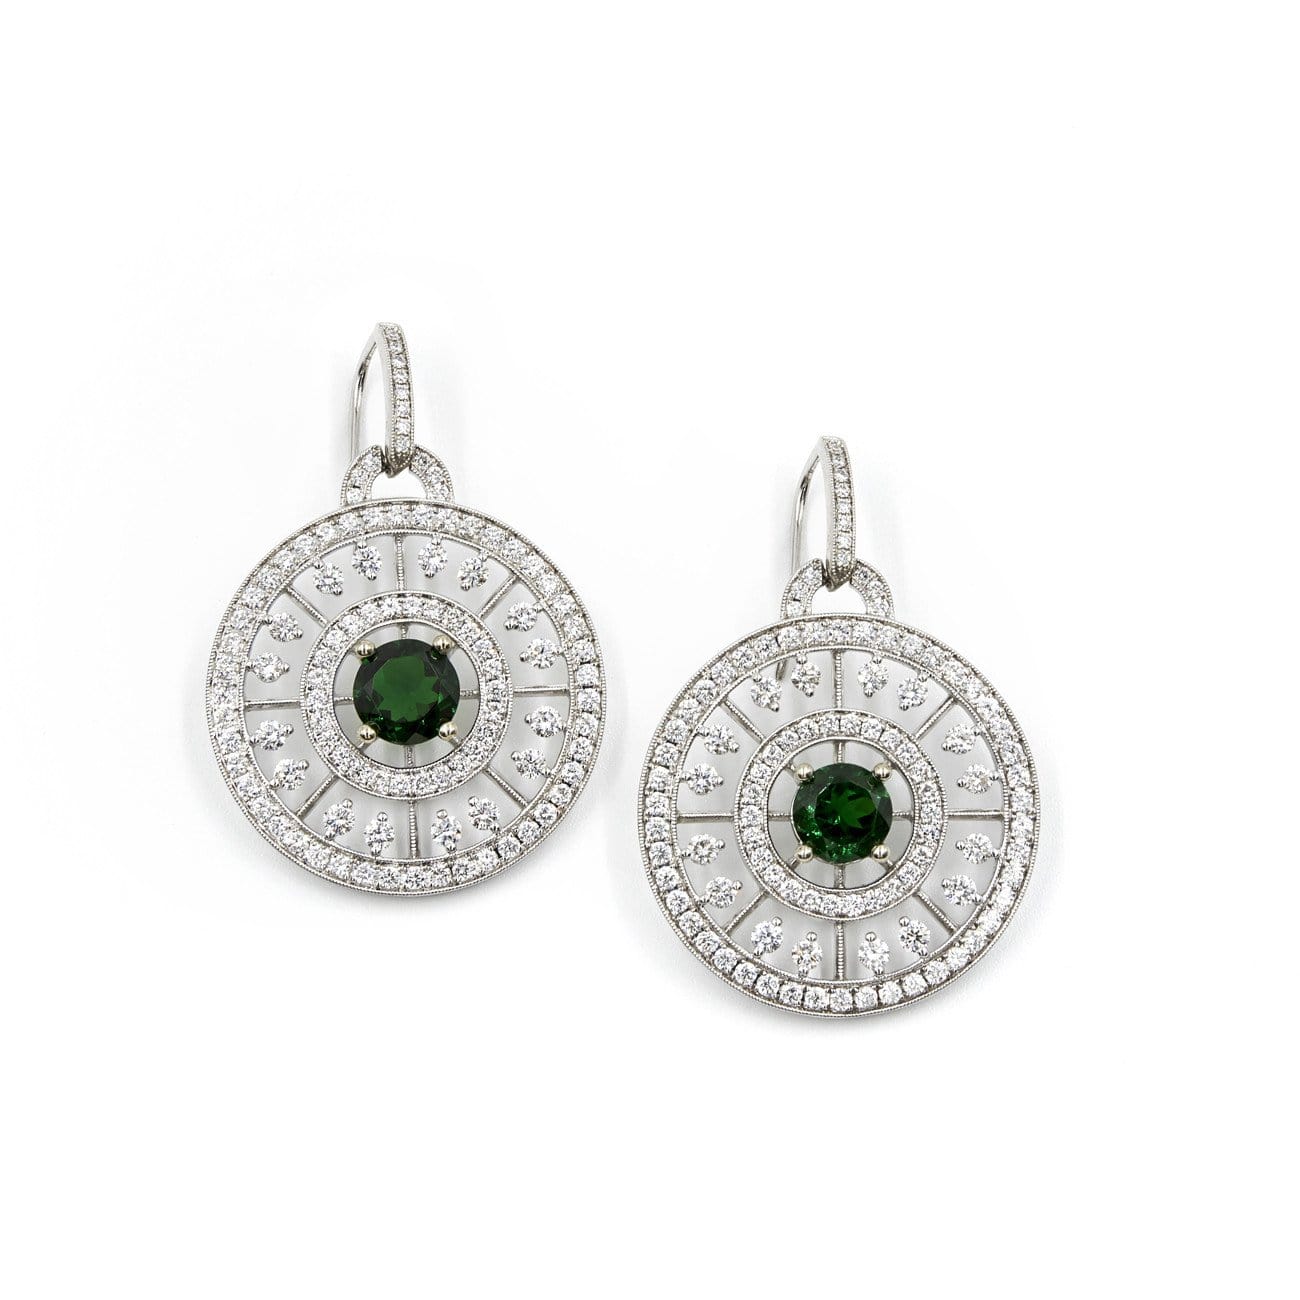 DUCHESS DIAMOND AND GEMSTONE EARRINGS - Chris Aire Fine Jewelry & Timepieces